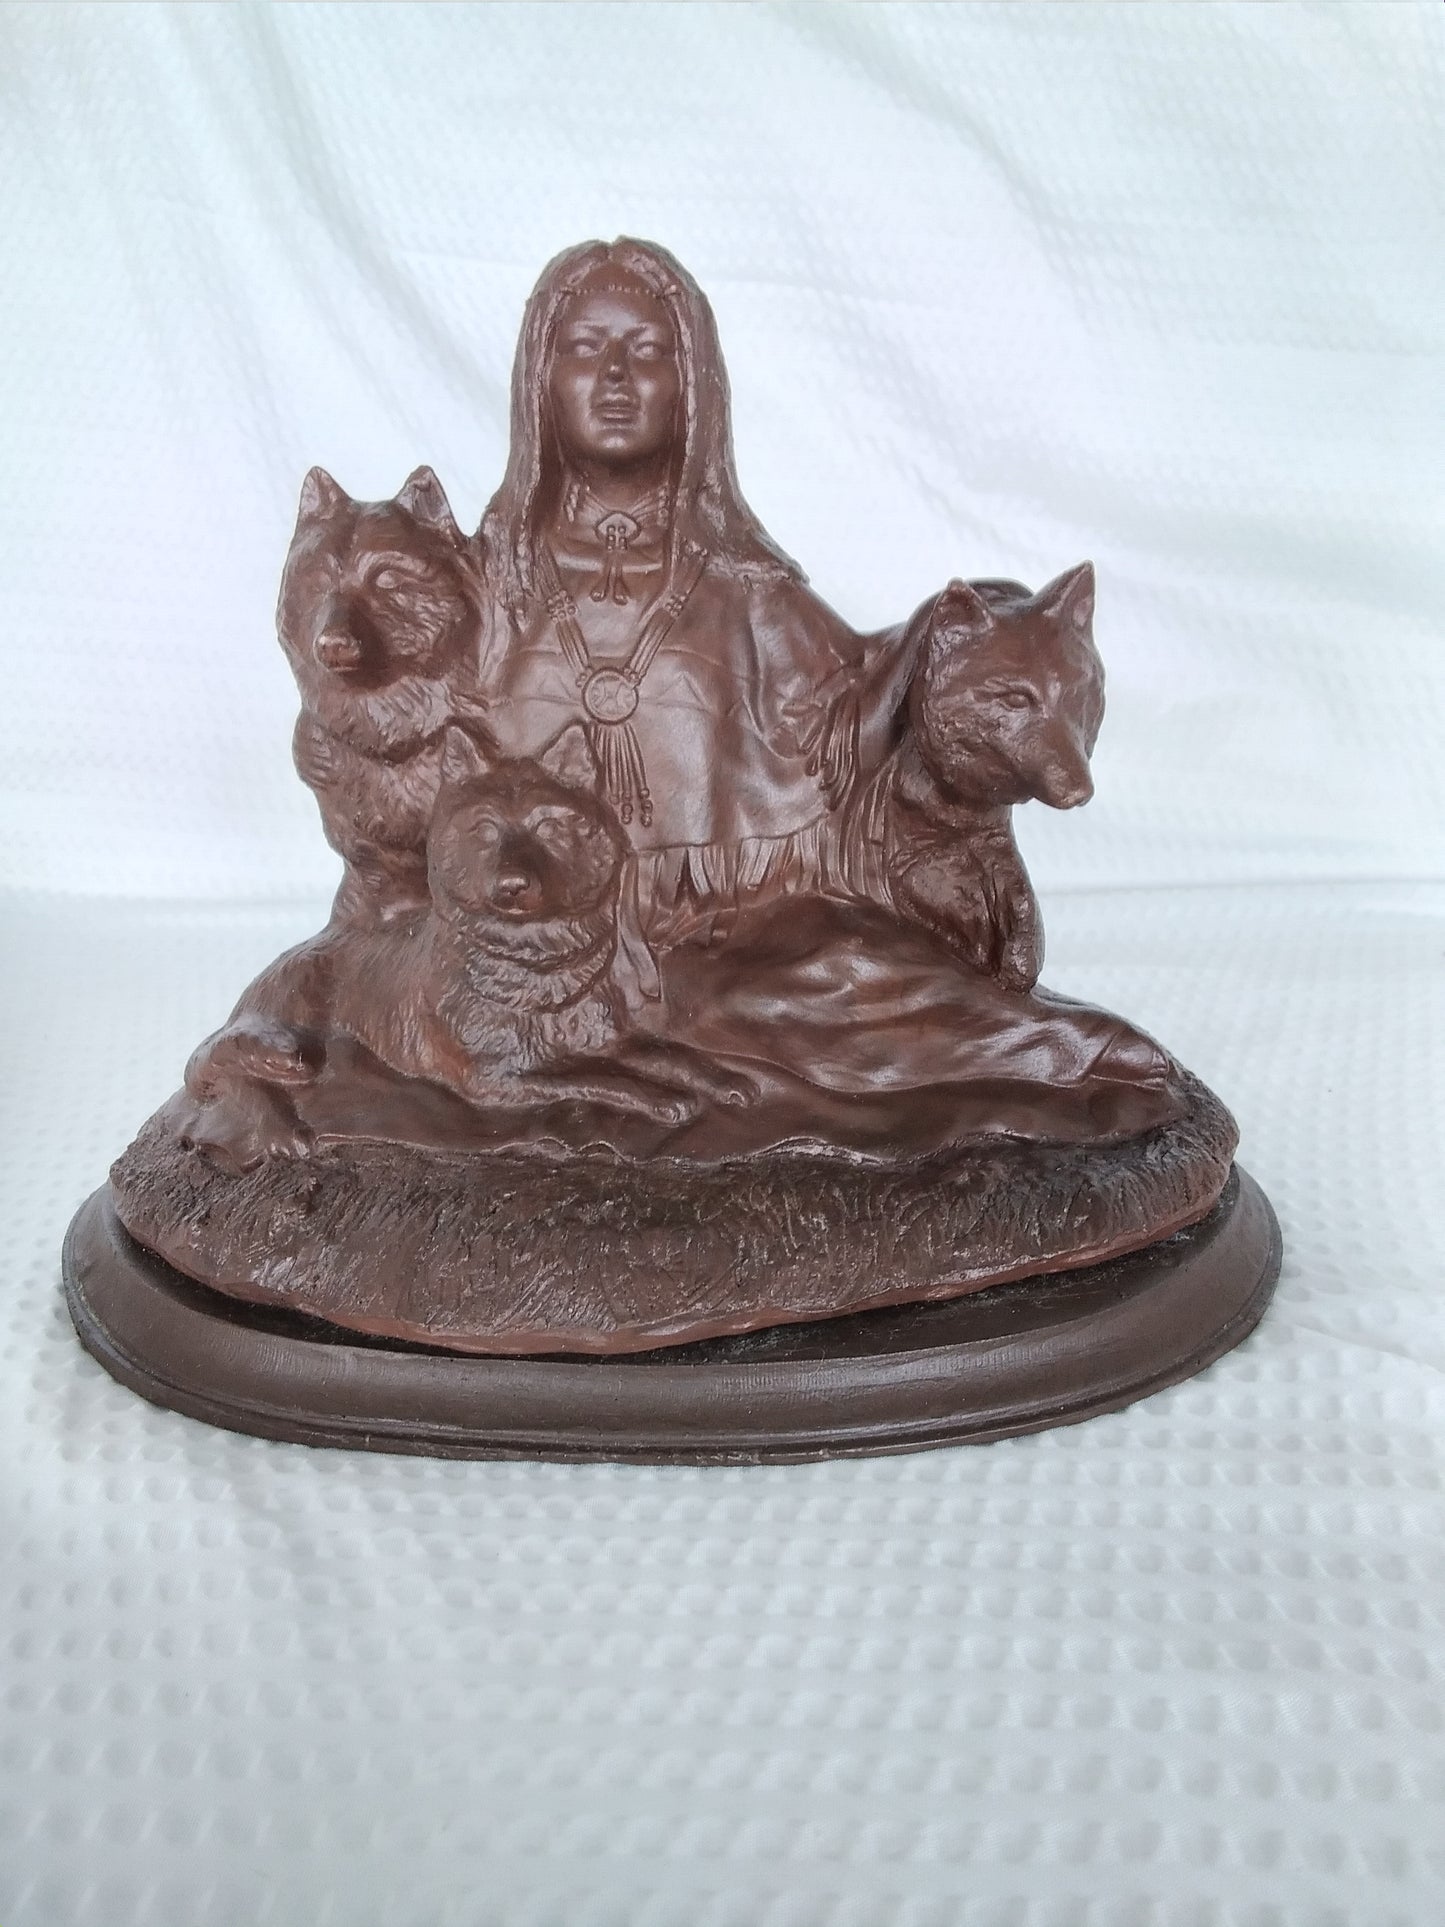 N.C. Artist "Lady of the Wolves" Figurine - Initialed and Dated by Artist